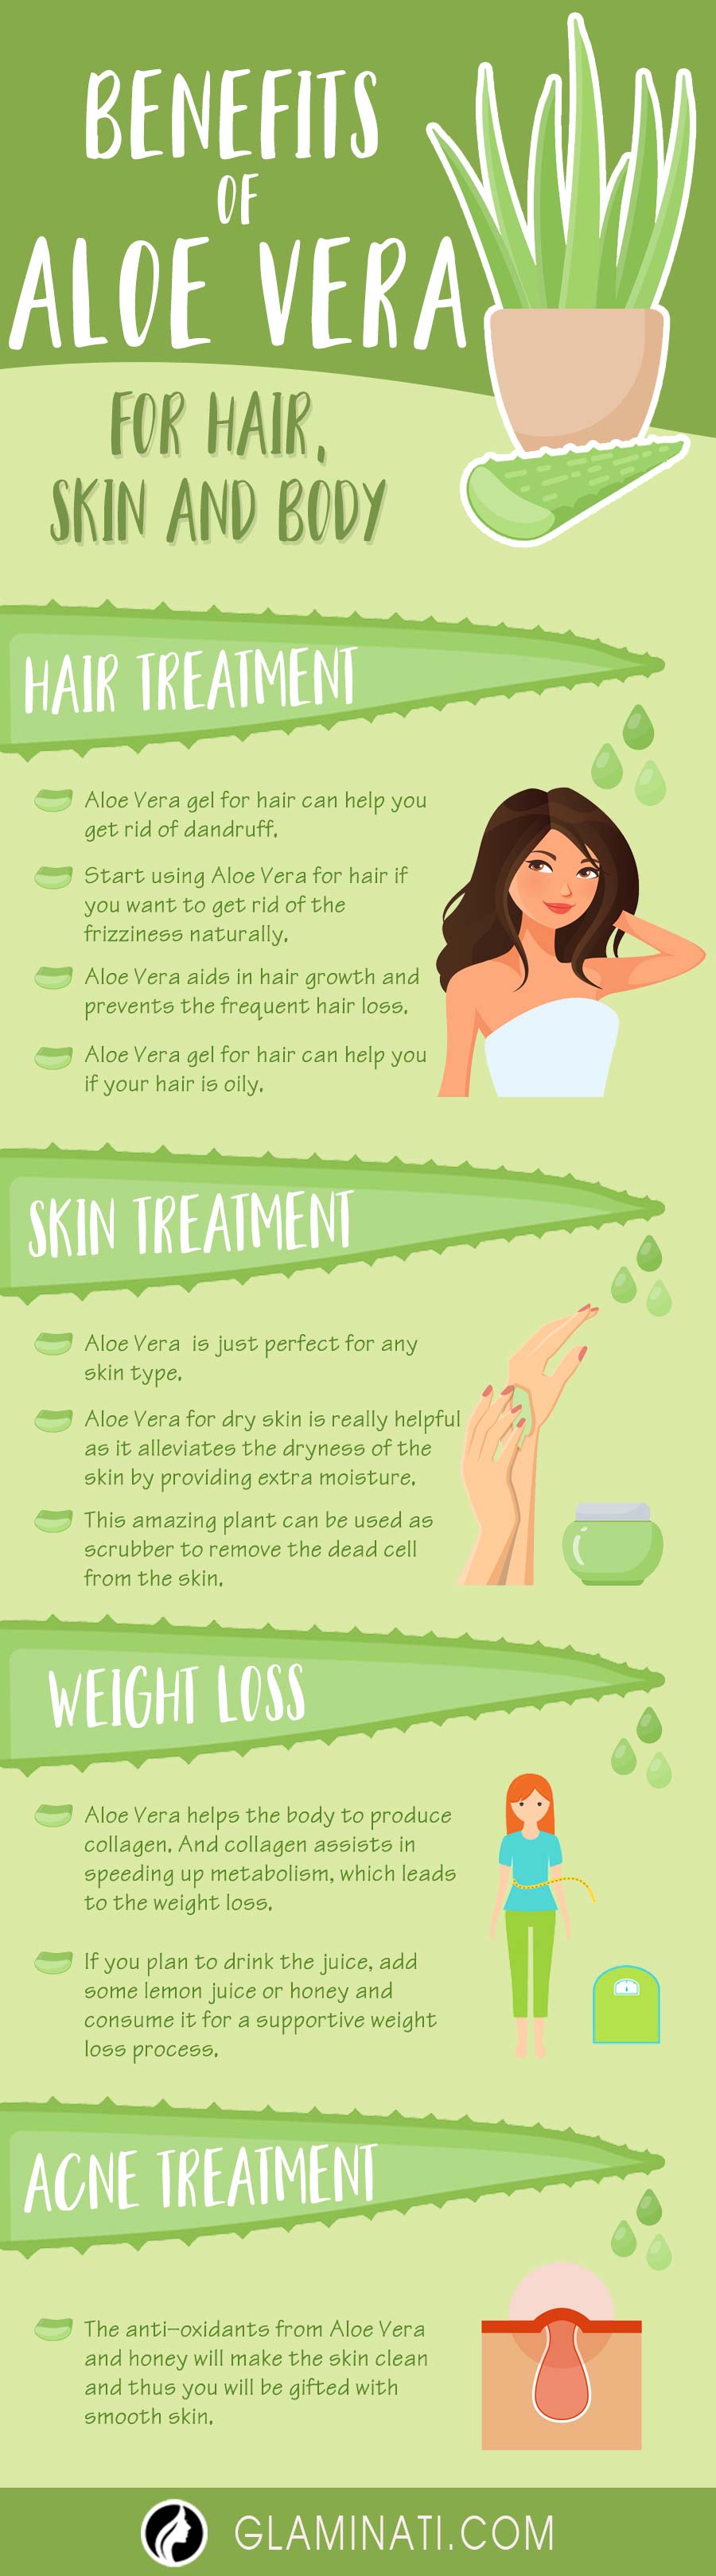 5 Benefits Of Aloe Vera For Hair Skin And Body 3611